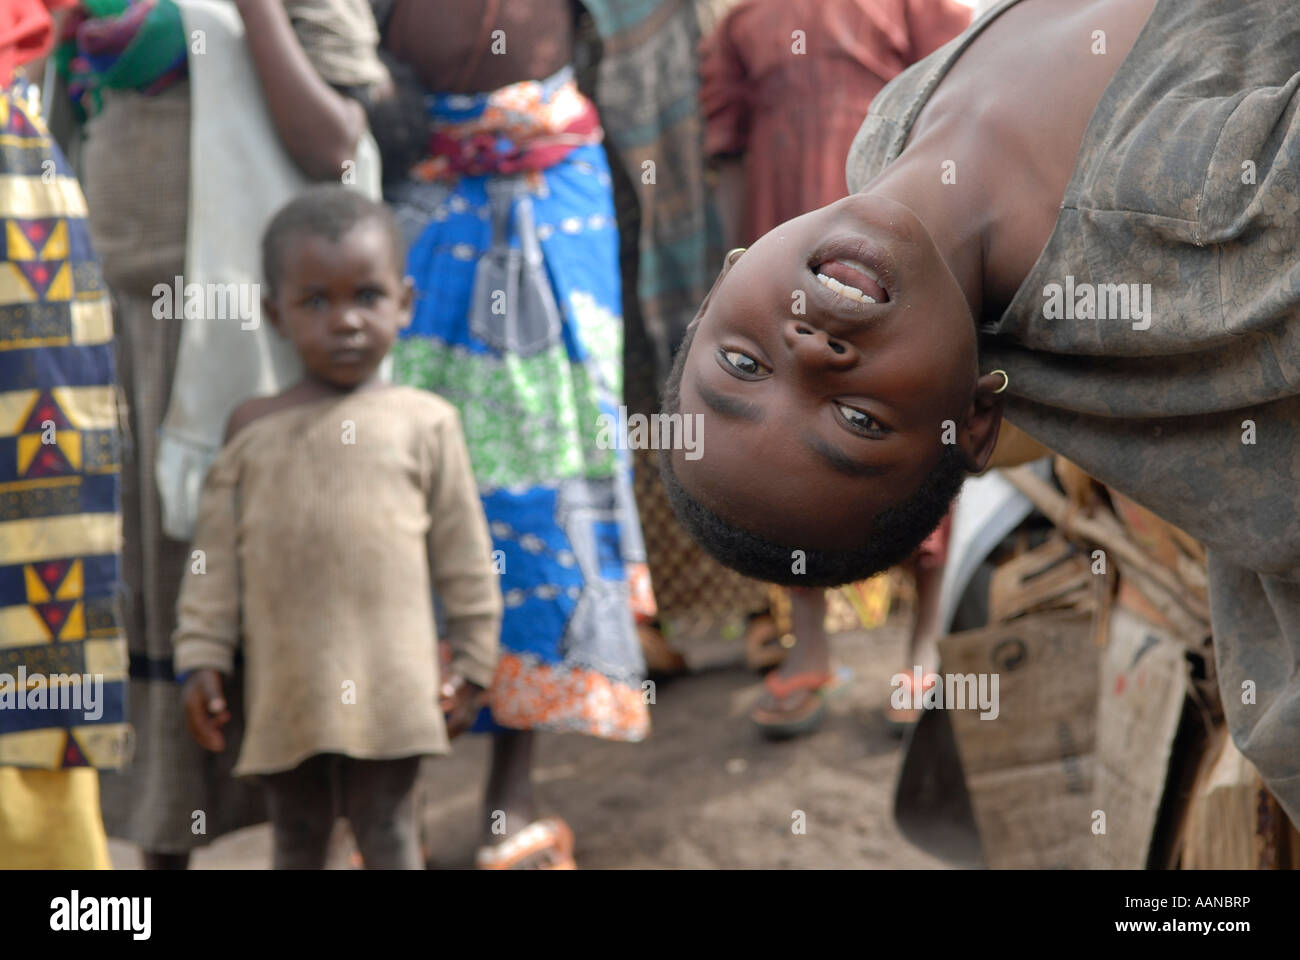 Internally displaced children in an IDP makeshift camp in North Kivu, DR Congo Africa Stock Photo